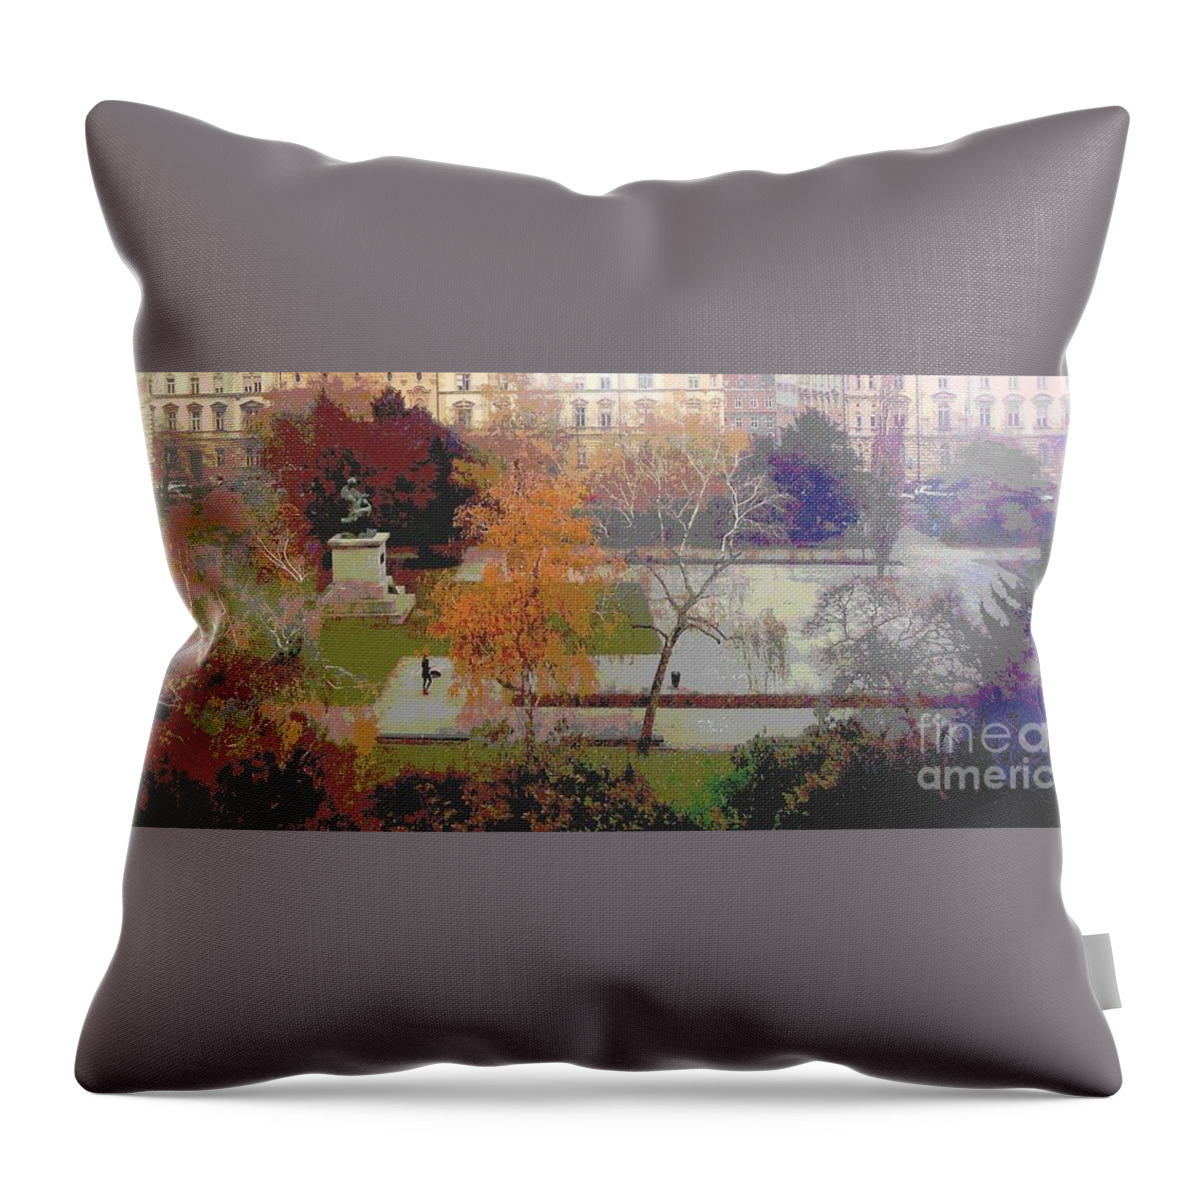 View Throw Pillow featuring the photograph Room With A View Zagreb by Ann Johndro-Collins